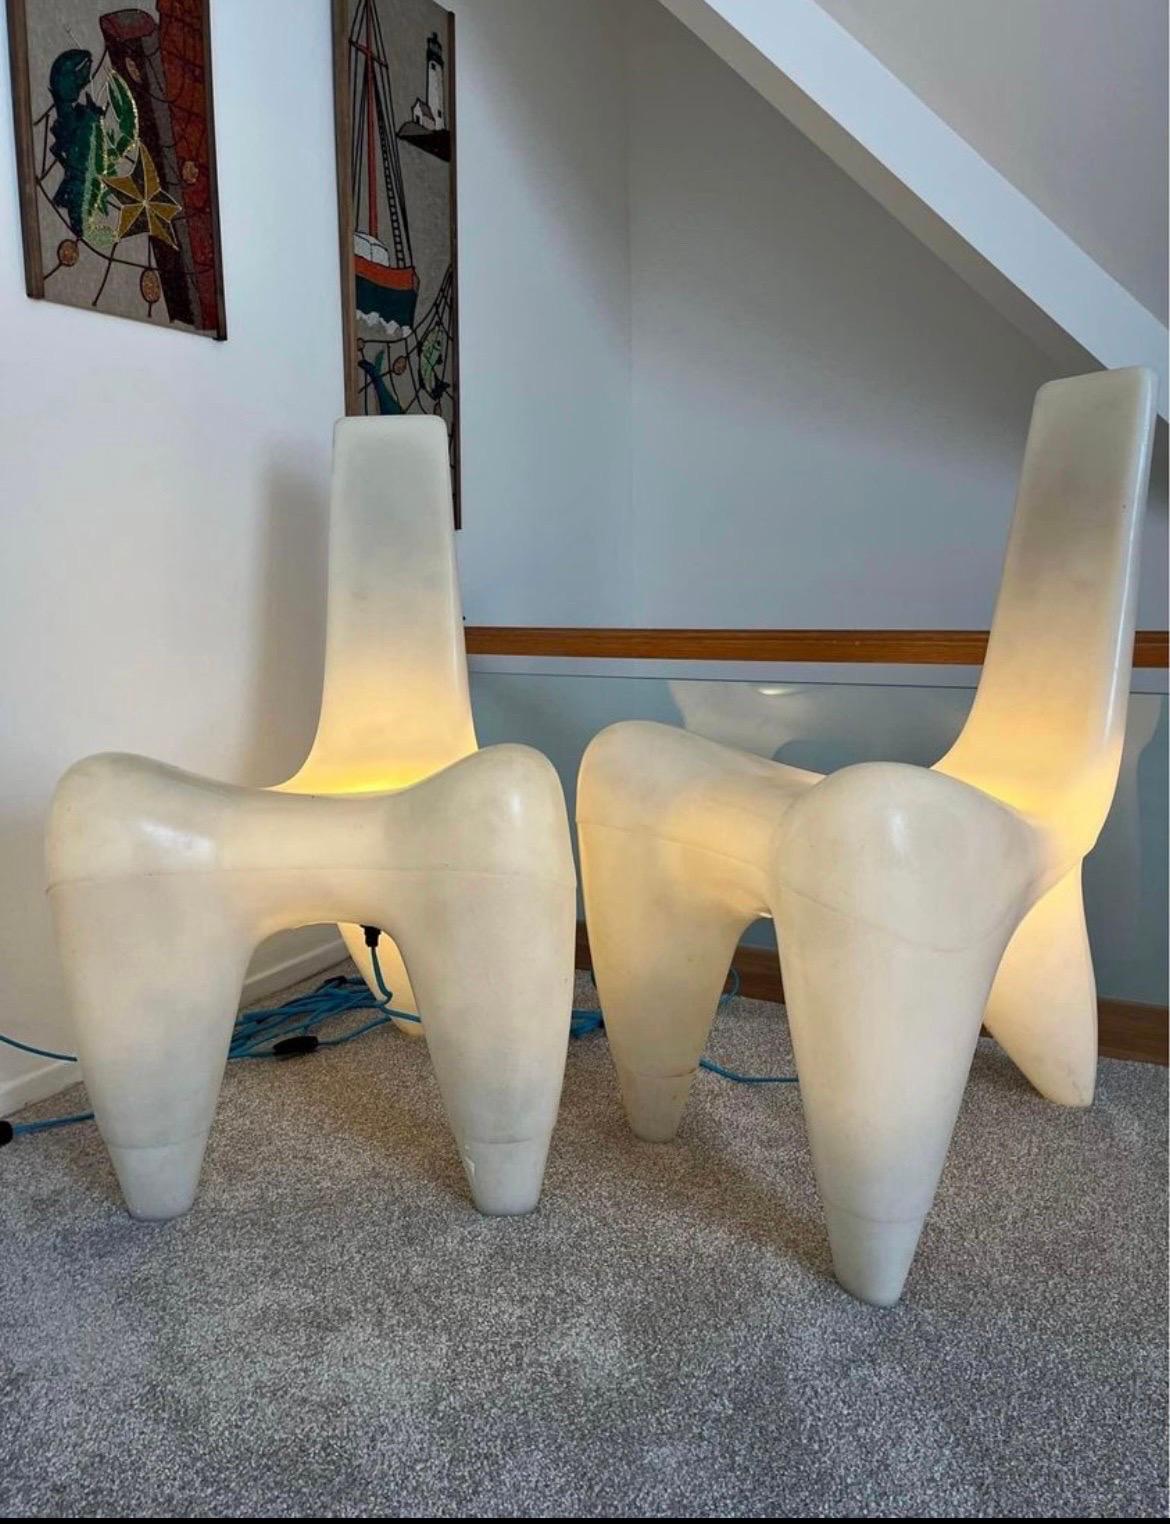 Pair of light up Galactica lounge chairs designed by Douglas Mont for Jetnet Designs. These were designed and made in the ‘90s in France. While not Mid Century Modern they blend right in and make a super fun lighting statement piece. Made of